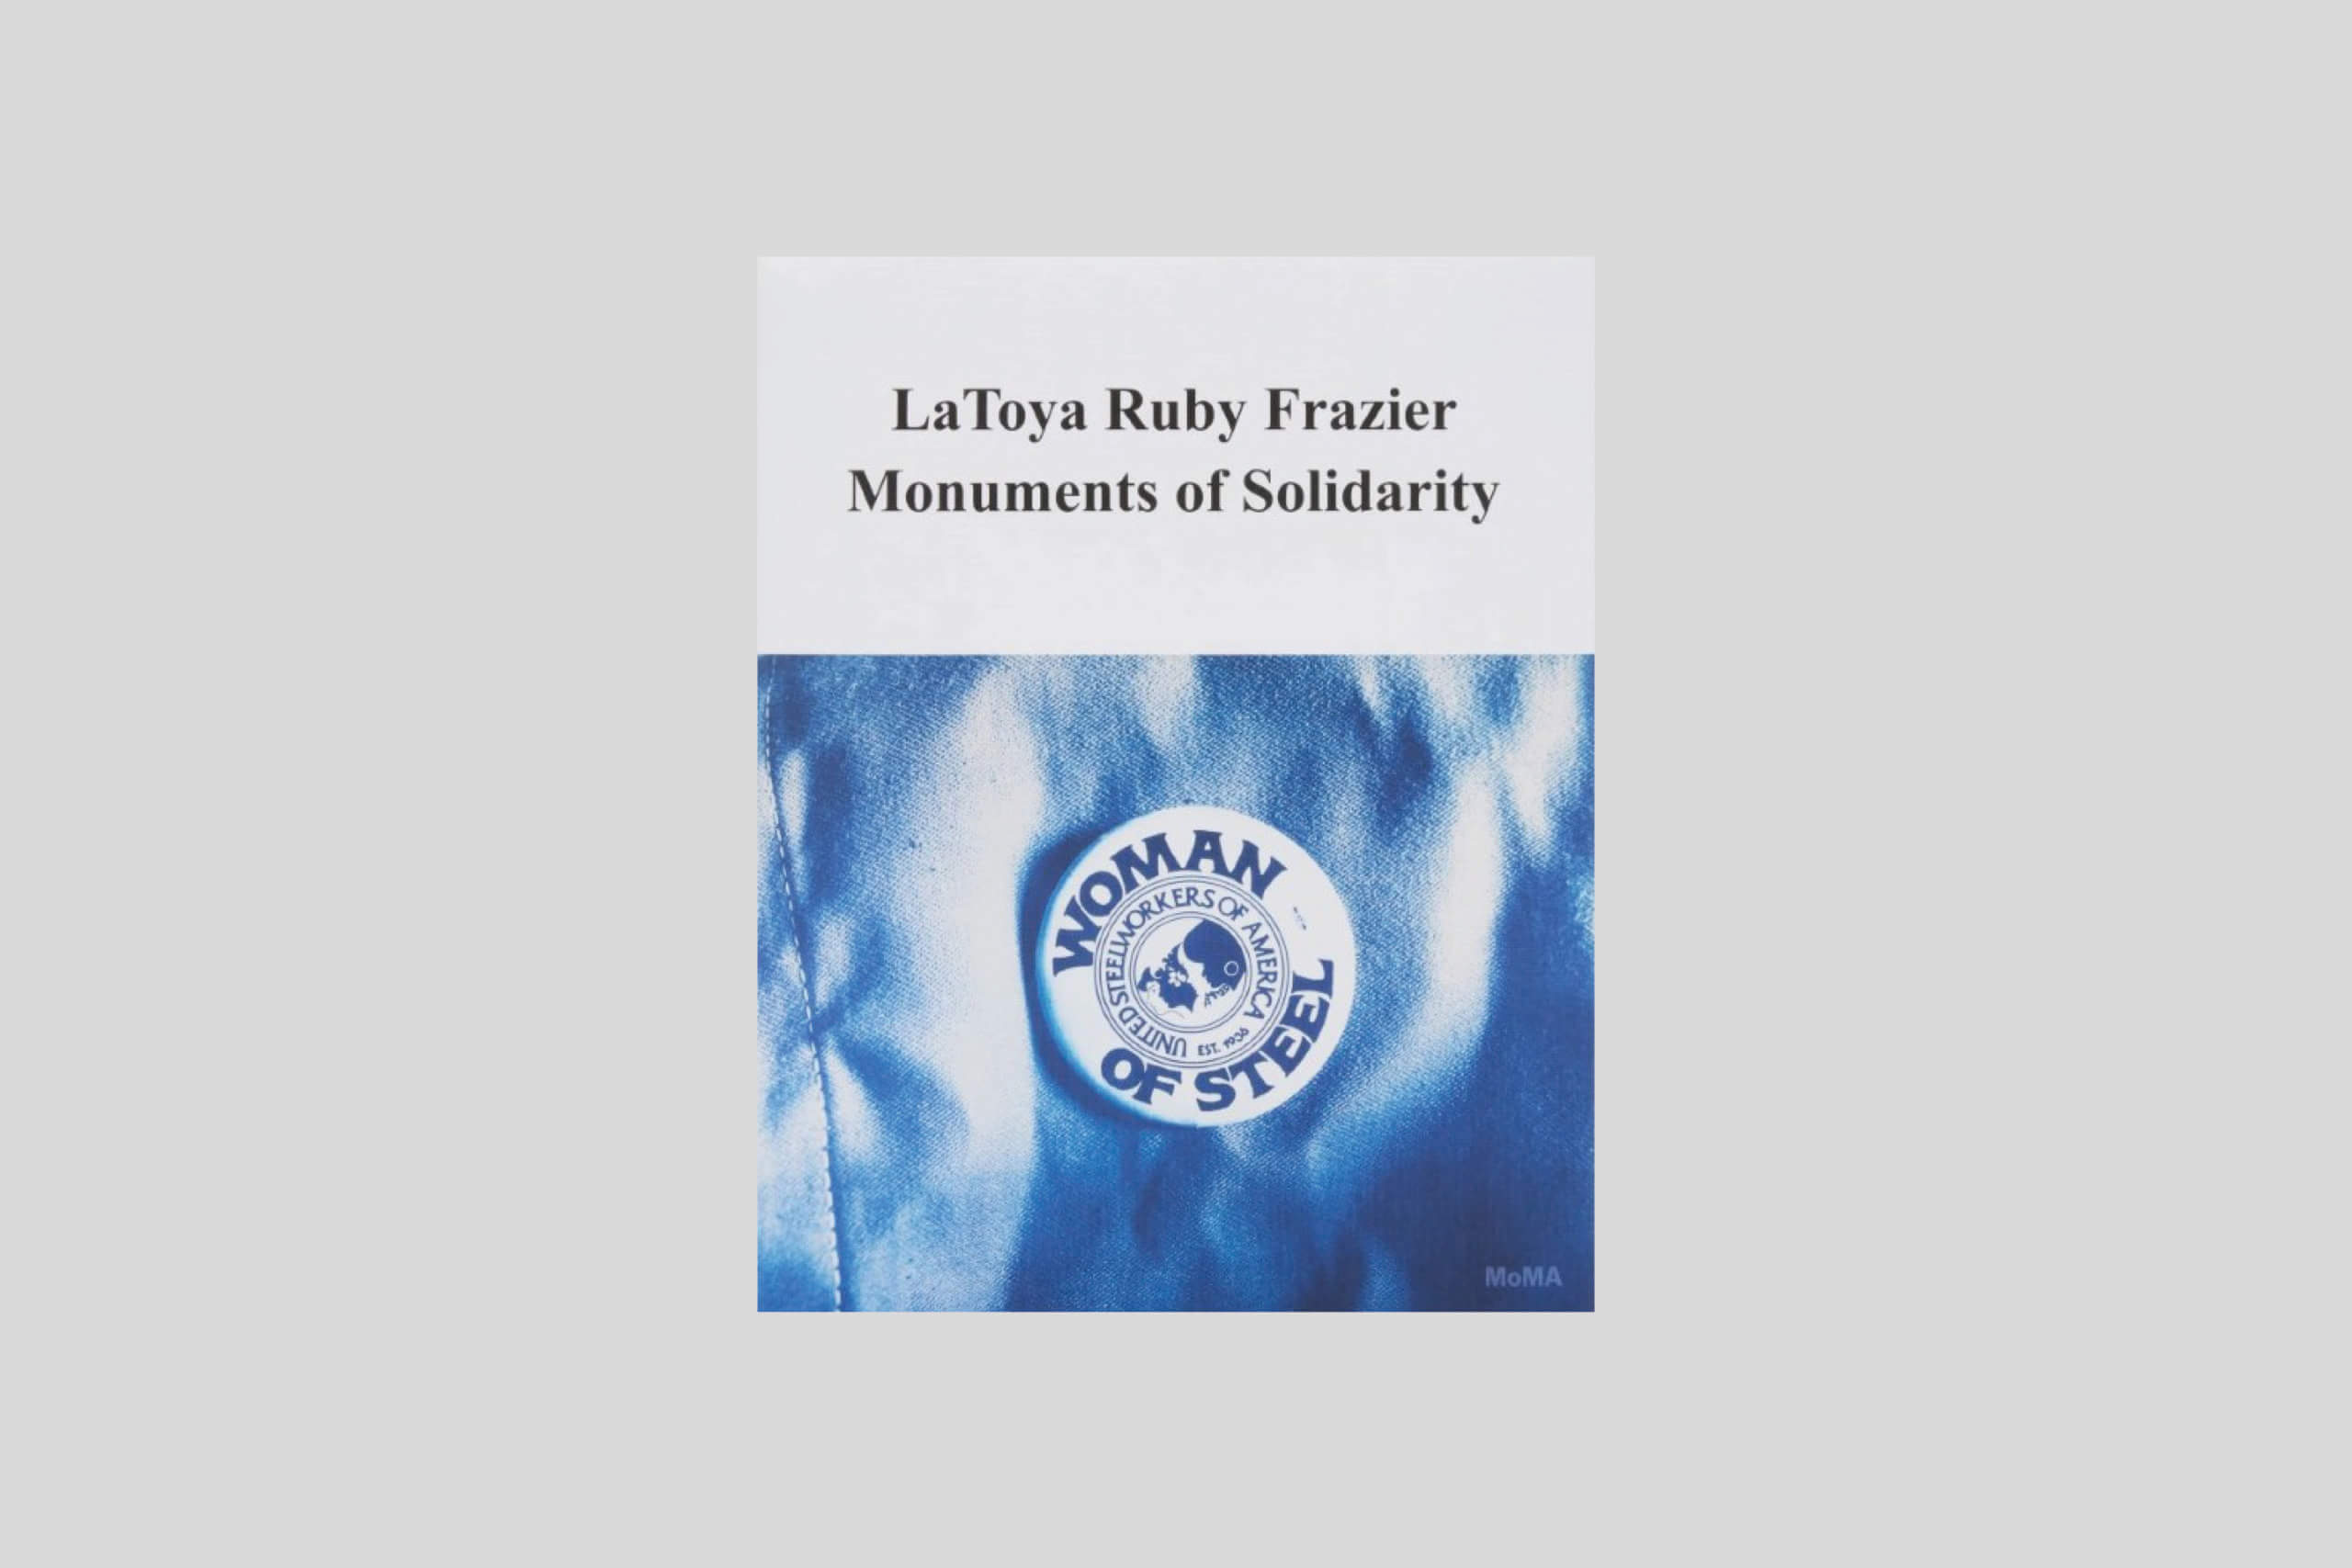 la-toyota-ruby-frazier-monuments-of-solidarity-frazier-moma-cover